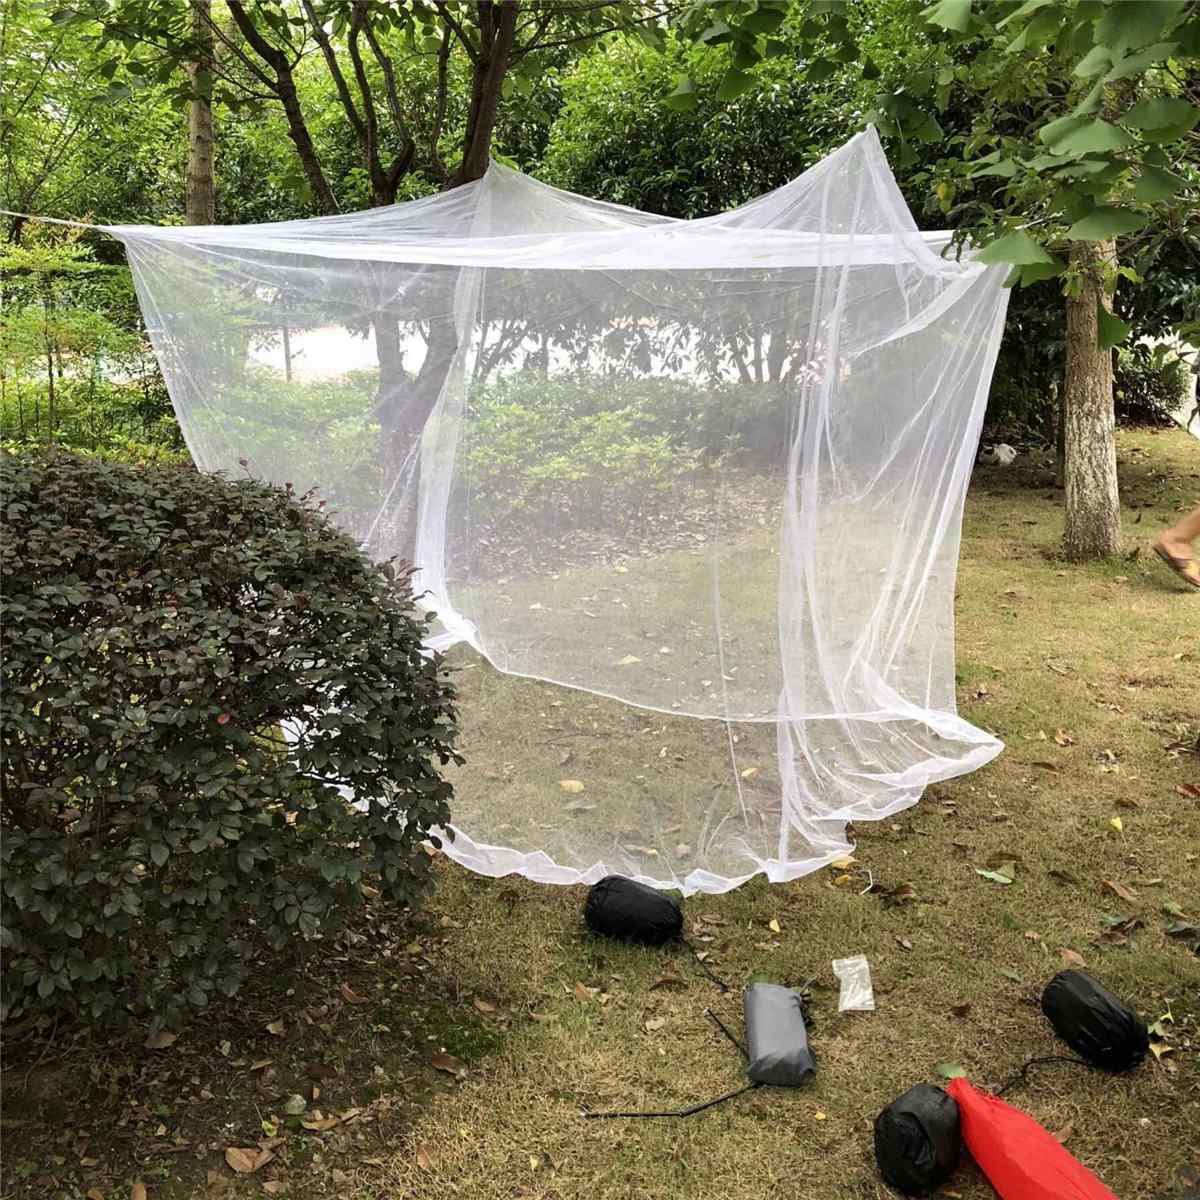 200x200x180cm Travel Camping Mosquito Net Huge Hammock Bug Net Bug-free Tarp Repellent Tent Insect Reject Canopy Bed Curtain